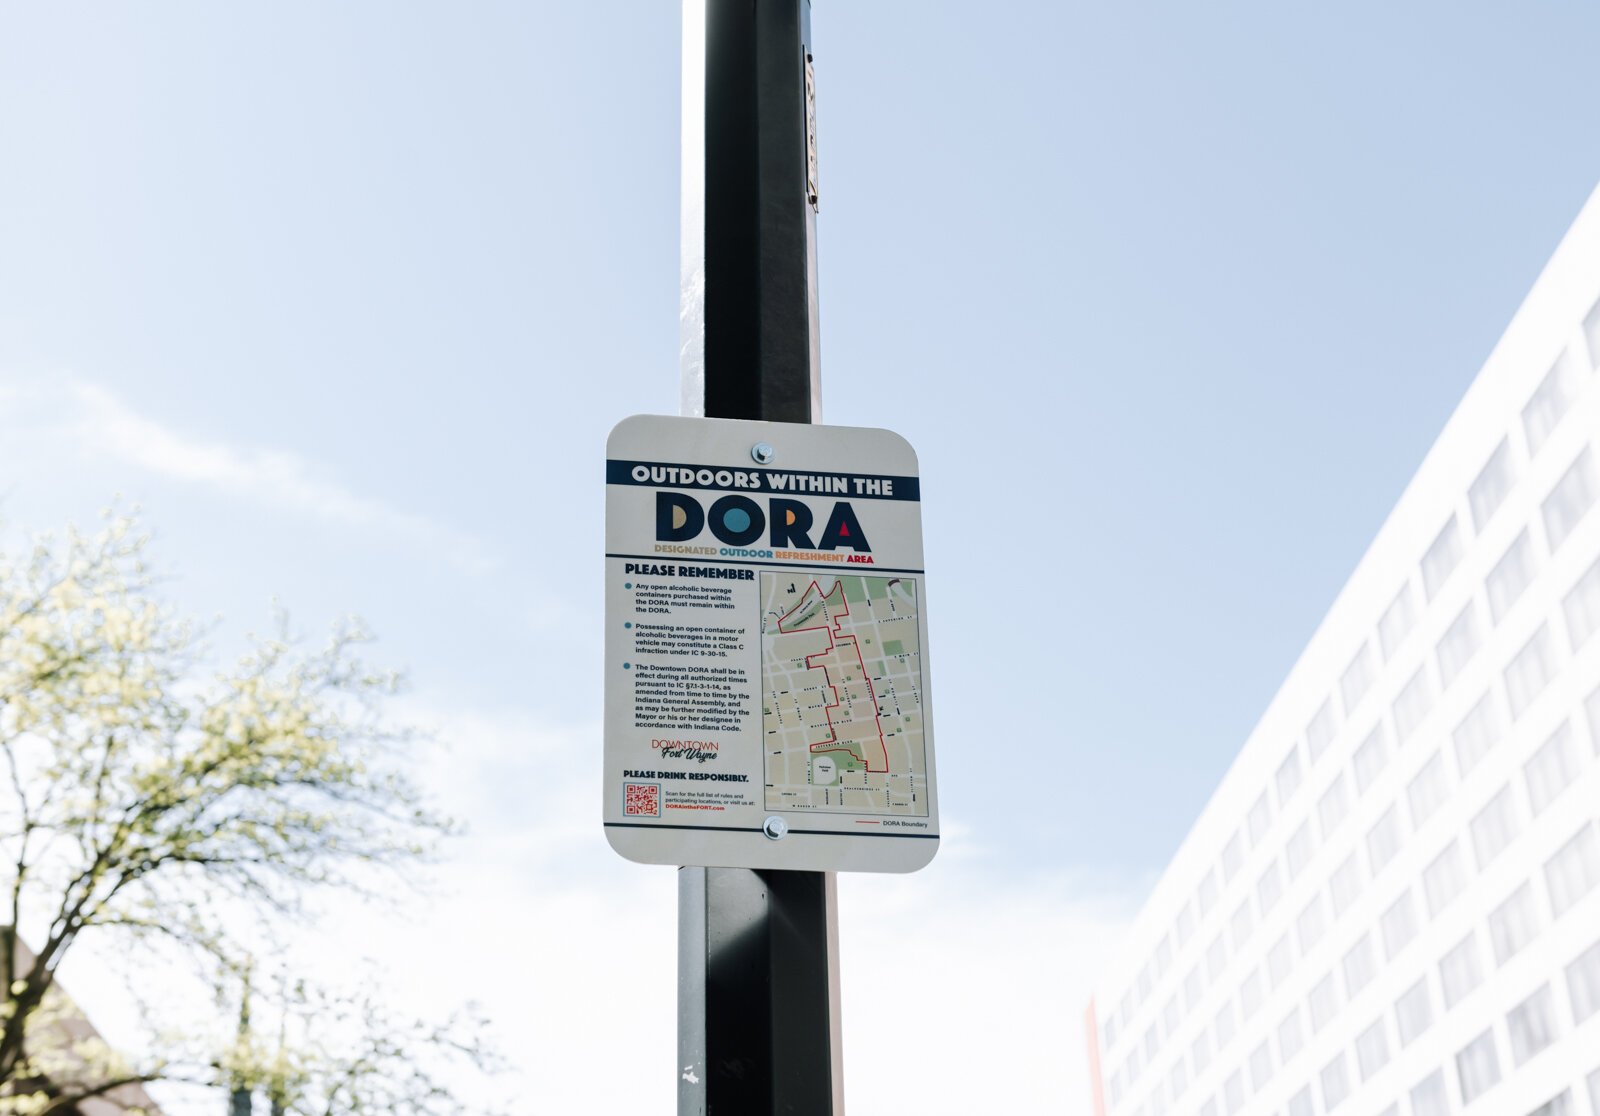 A sign at Washington Boulevard and Calhoun Street reminds people of the rules within the new Downtown DORA (Designated Outdoor Refreshment Area).